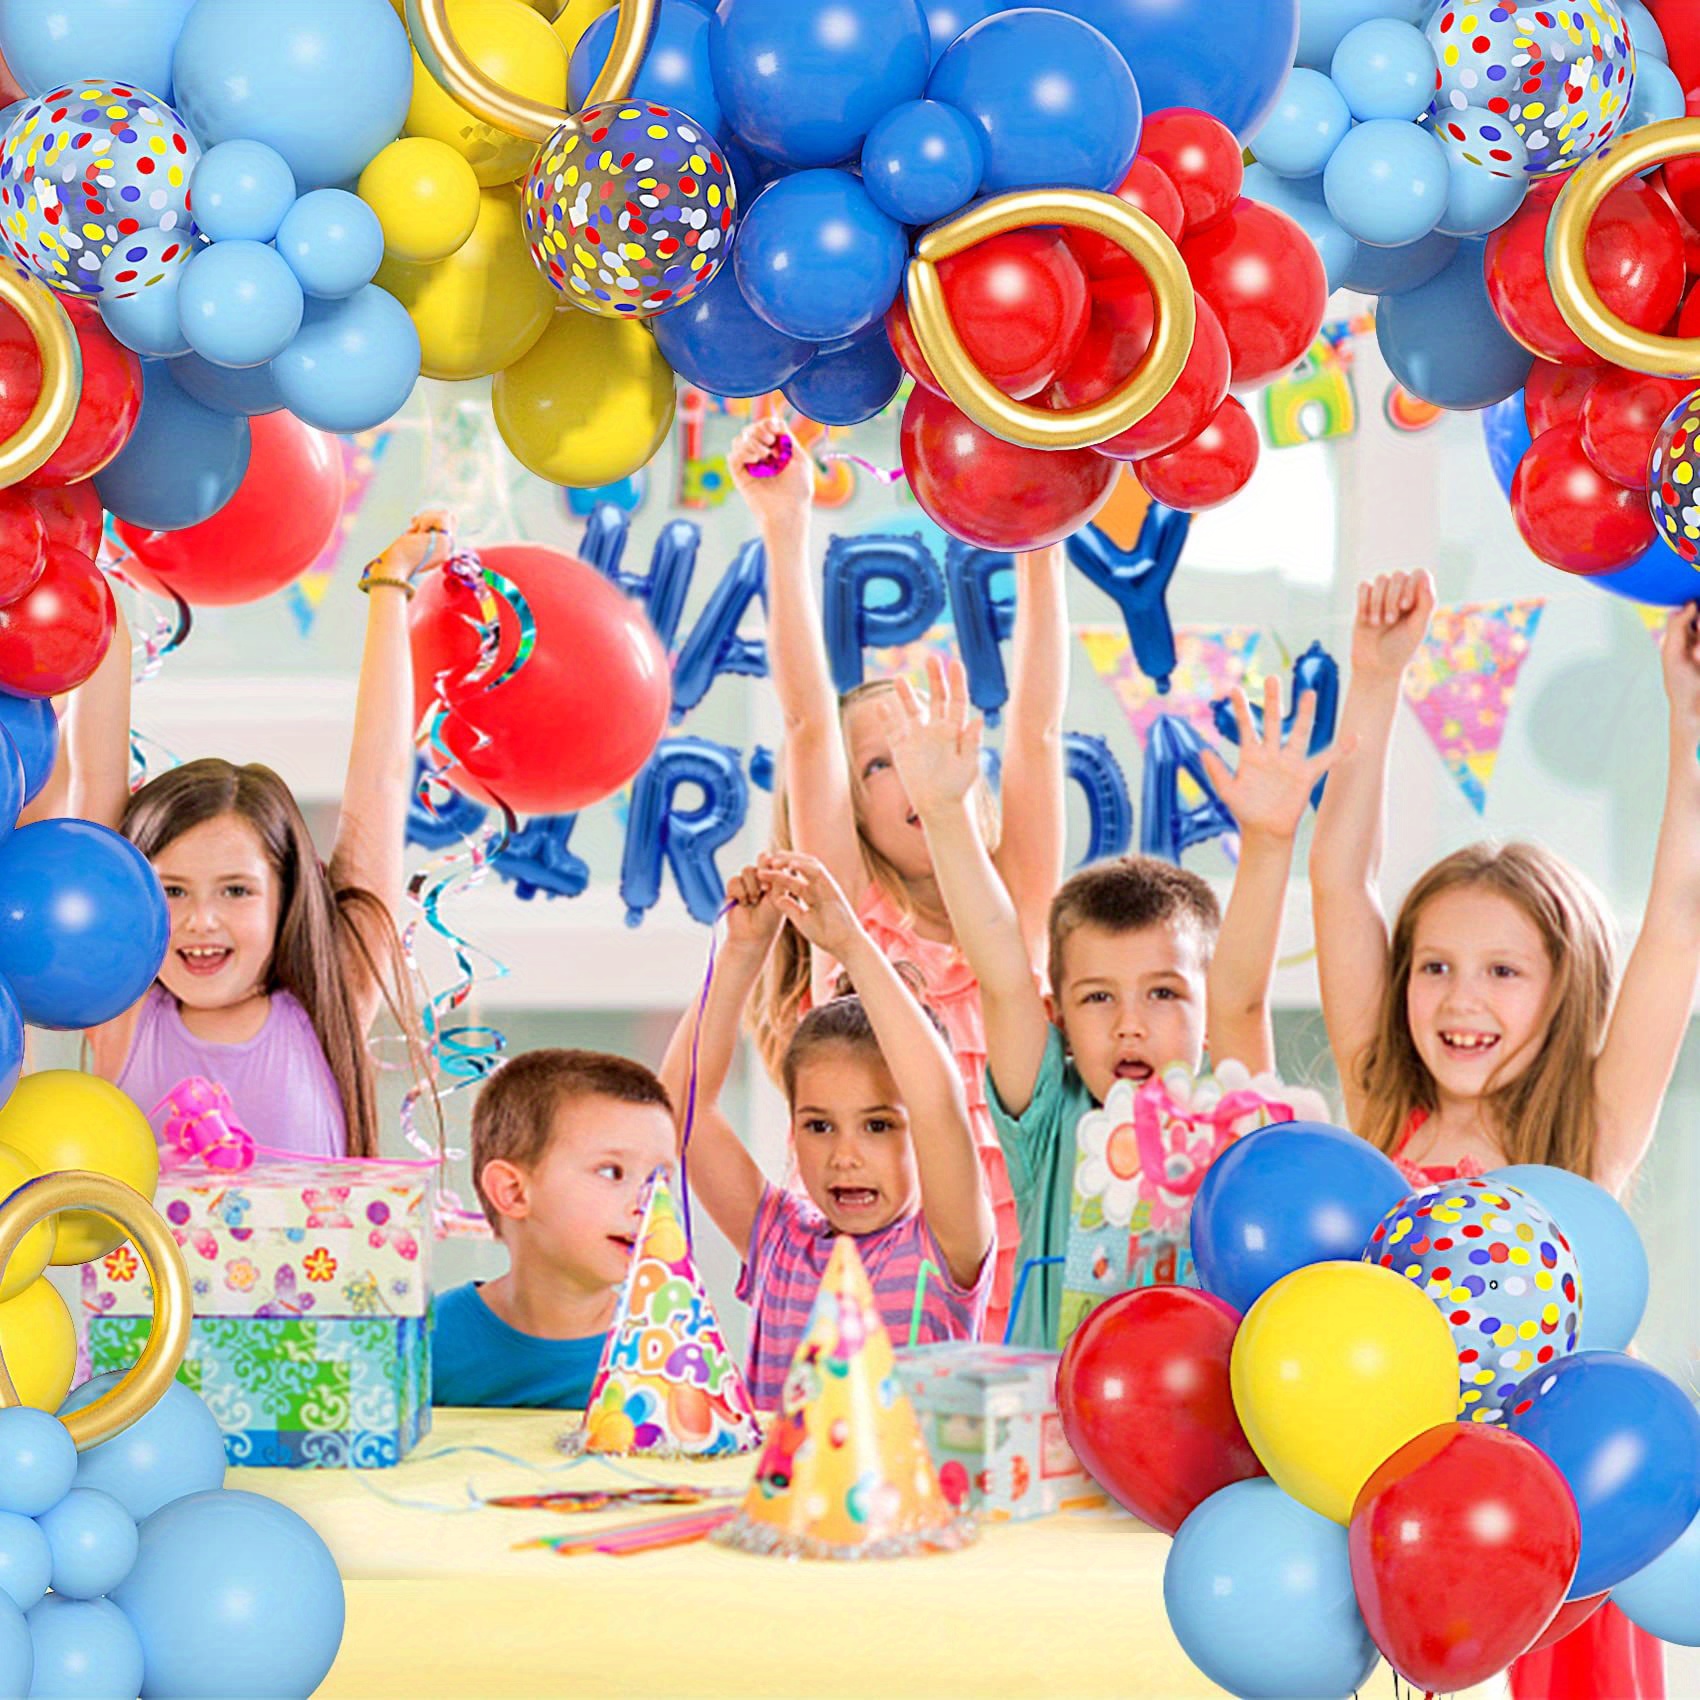 Comprar Sonic Birthday Party Supplies, Sonic Birthday Party Decorations  Include Happy Birthday Banners, Hanging Swirls, Cake Topper, Balloons,  Backdrop for Sonic Party Decorations en USA desde República Dominicana